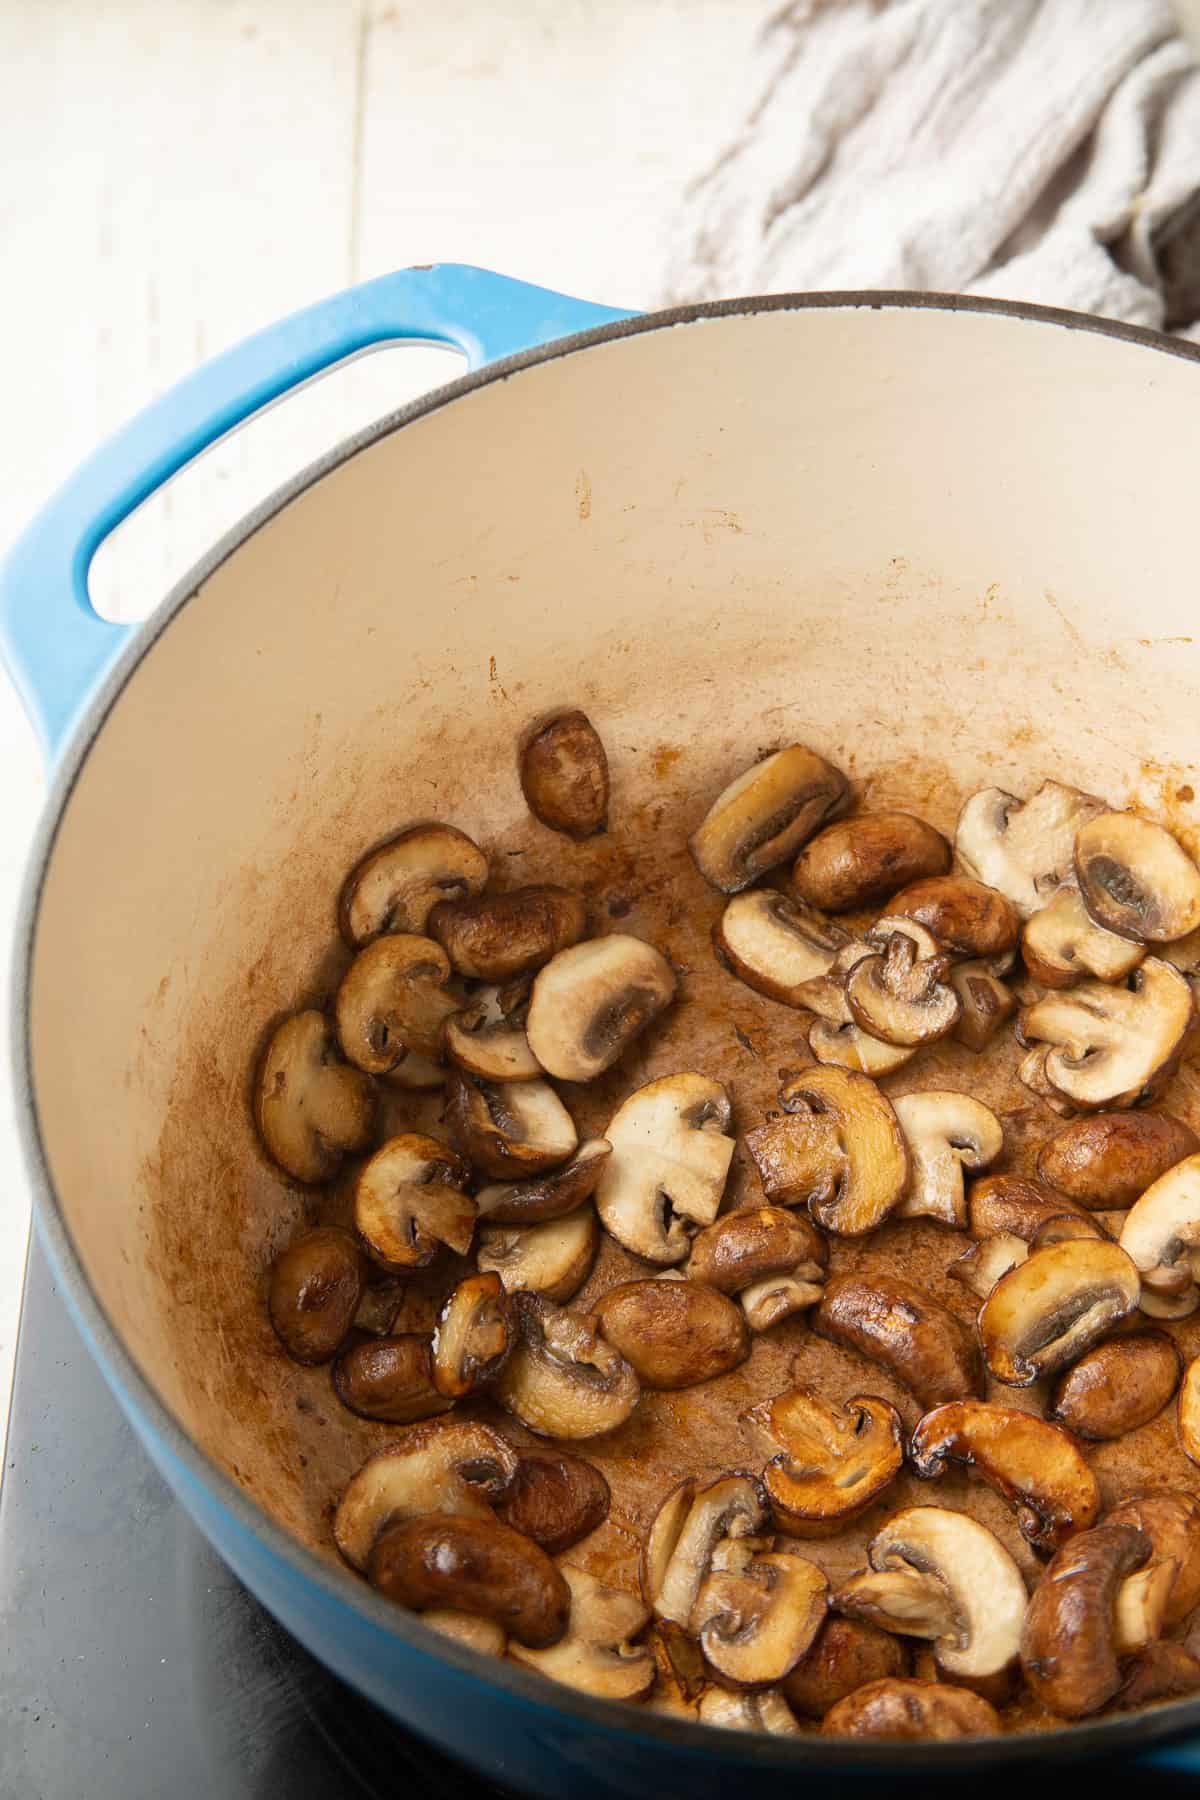 Cooking mushrooms in a pot.